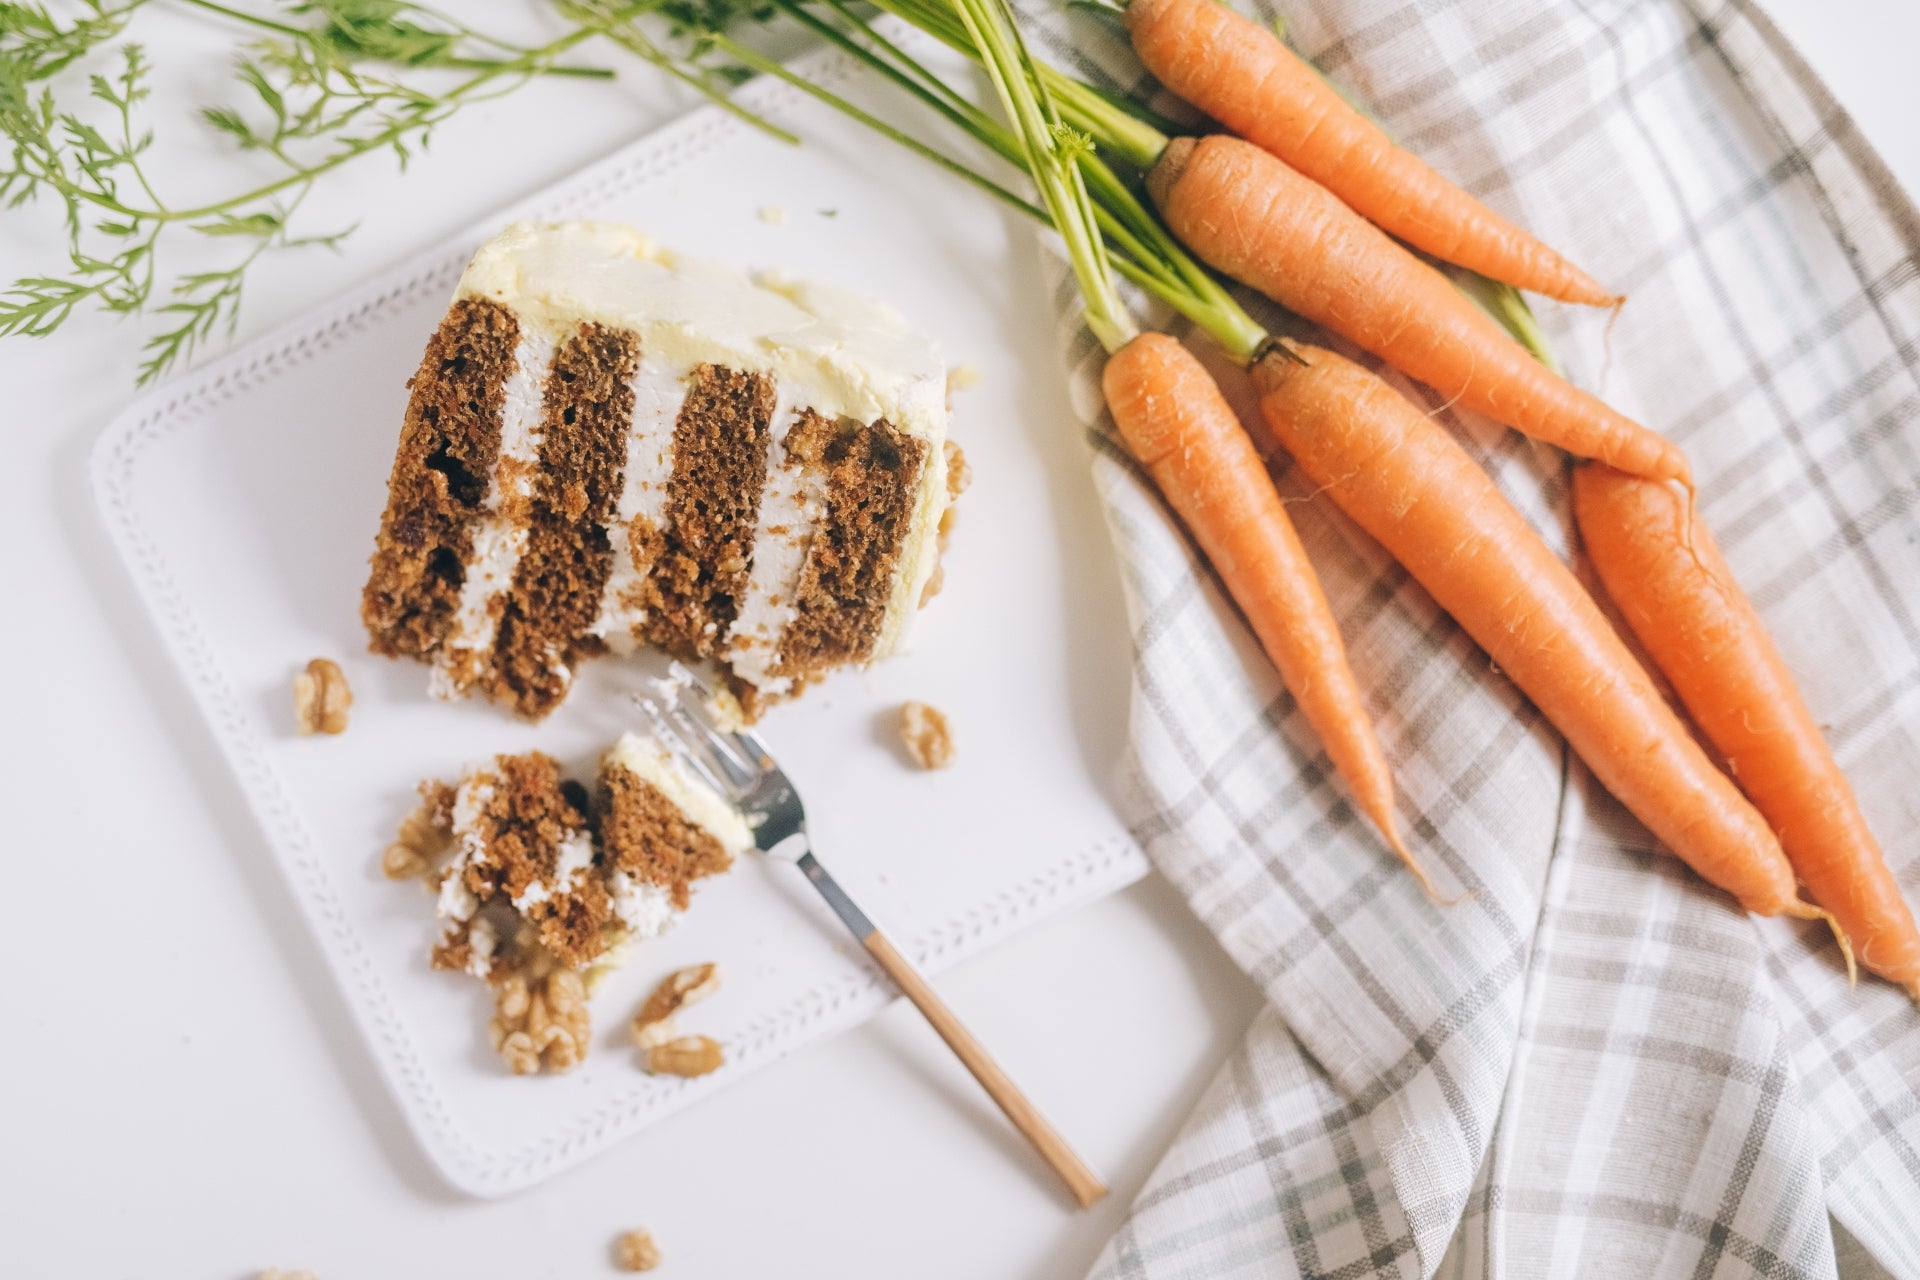 A slice of carrot cake placed beside a bundle of carrots